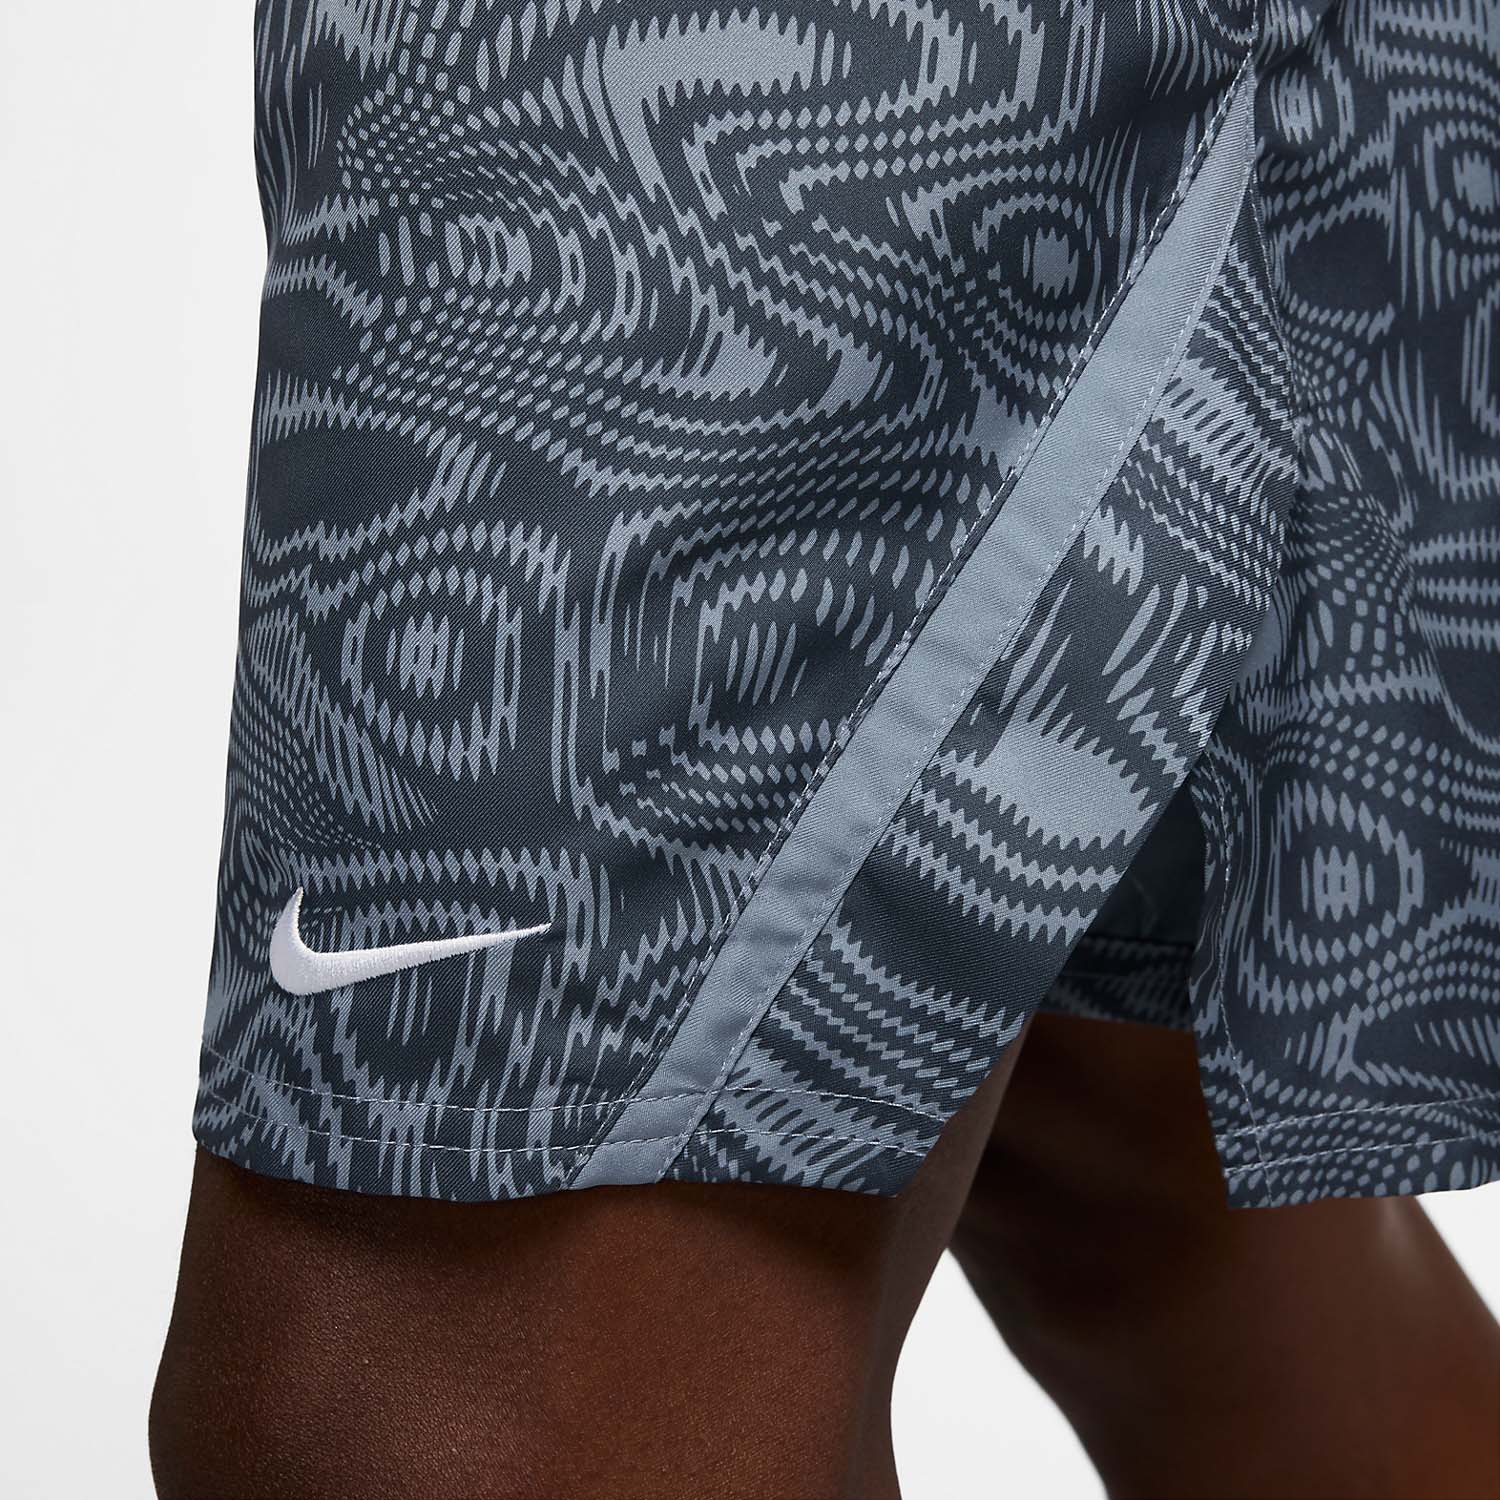 Nike Court Victory Graphic 9in Shorts - Ashen Slate/Thunder Blue/White